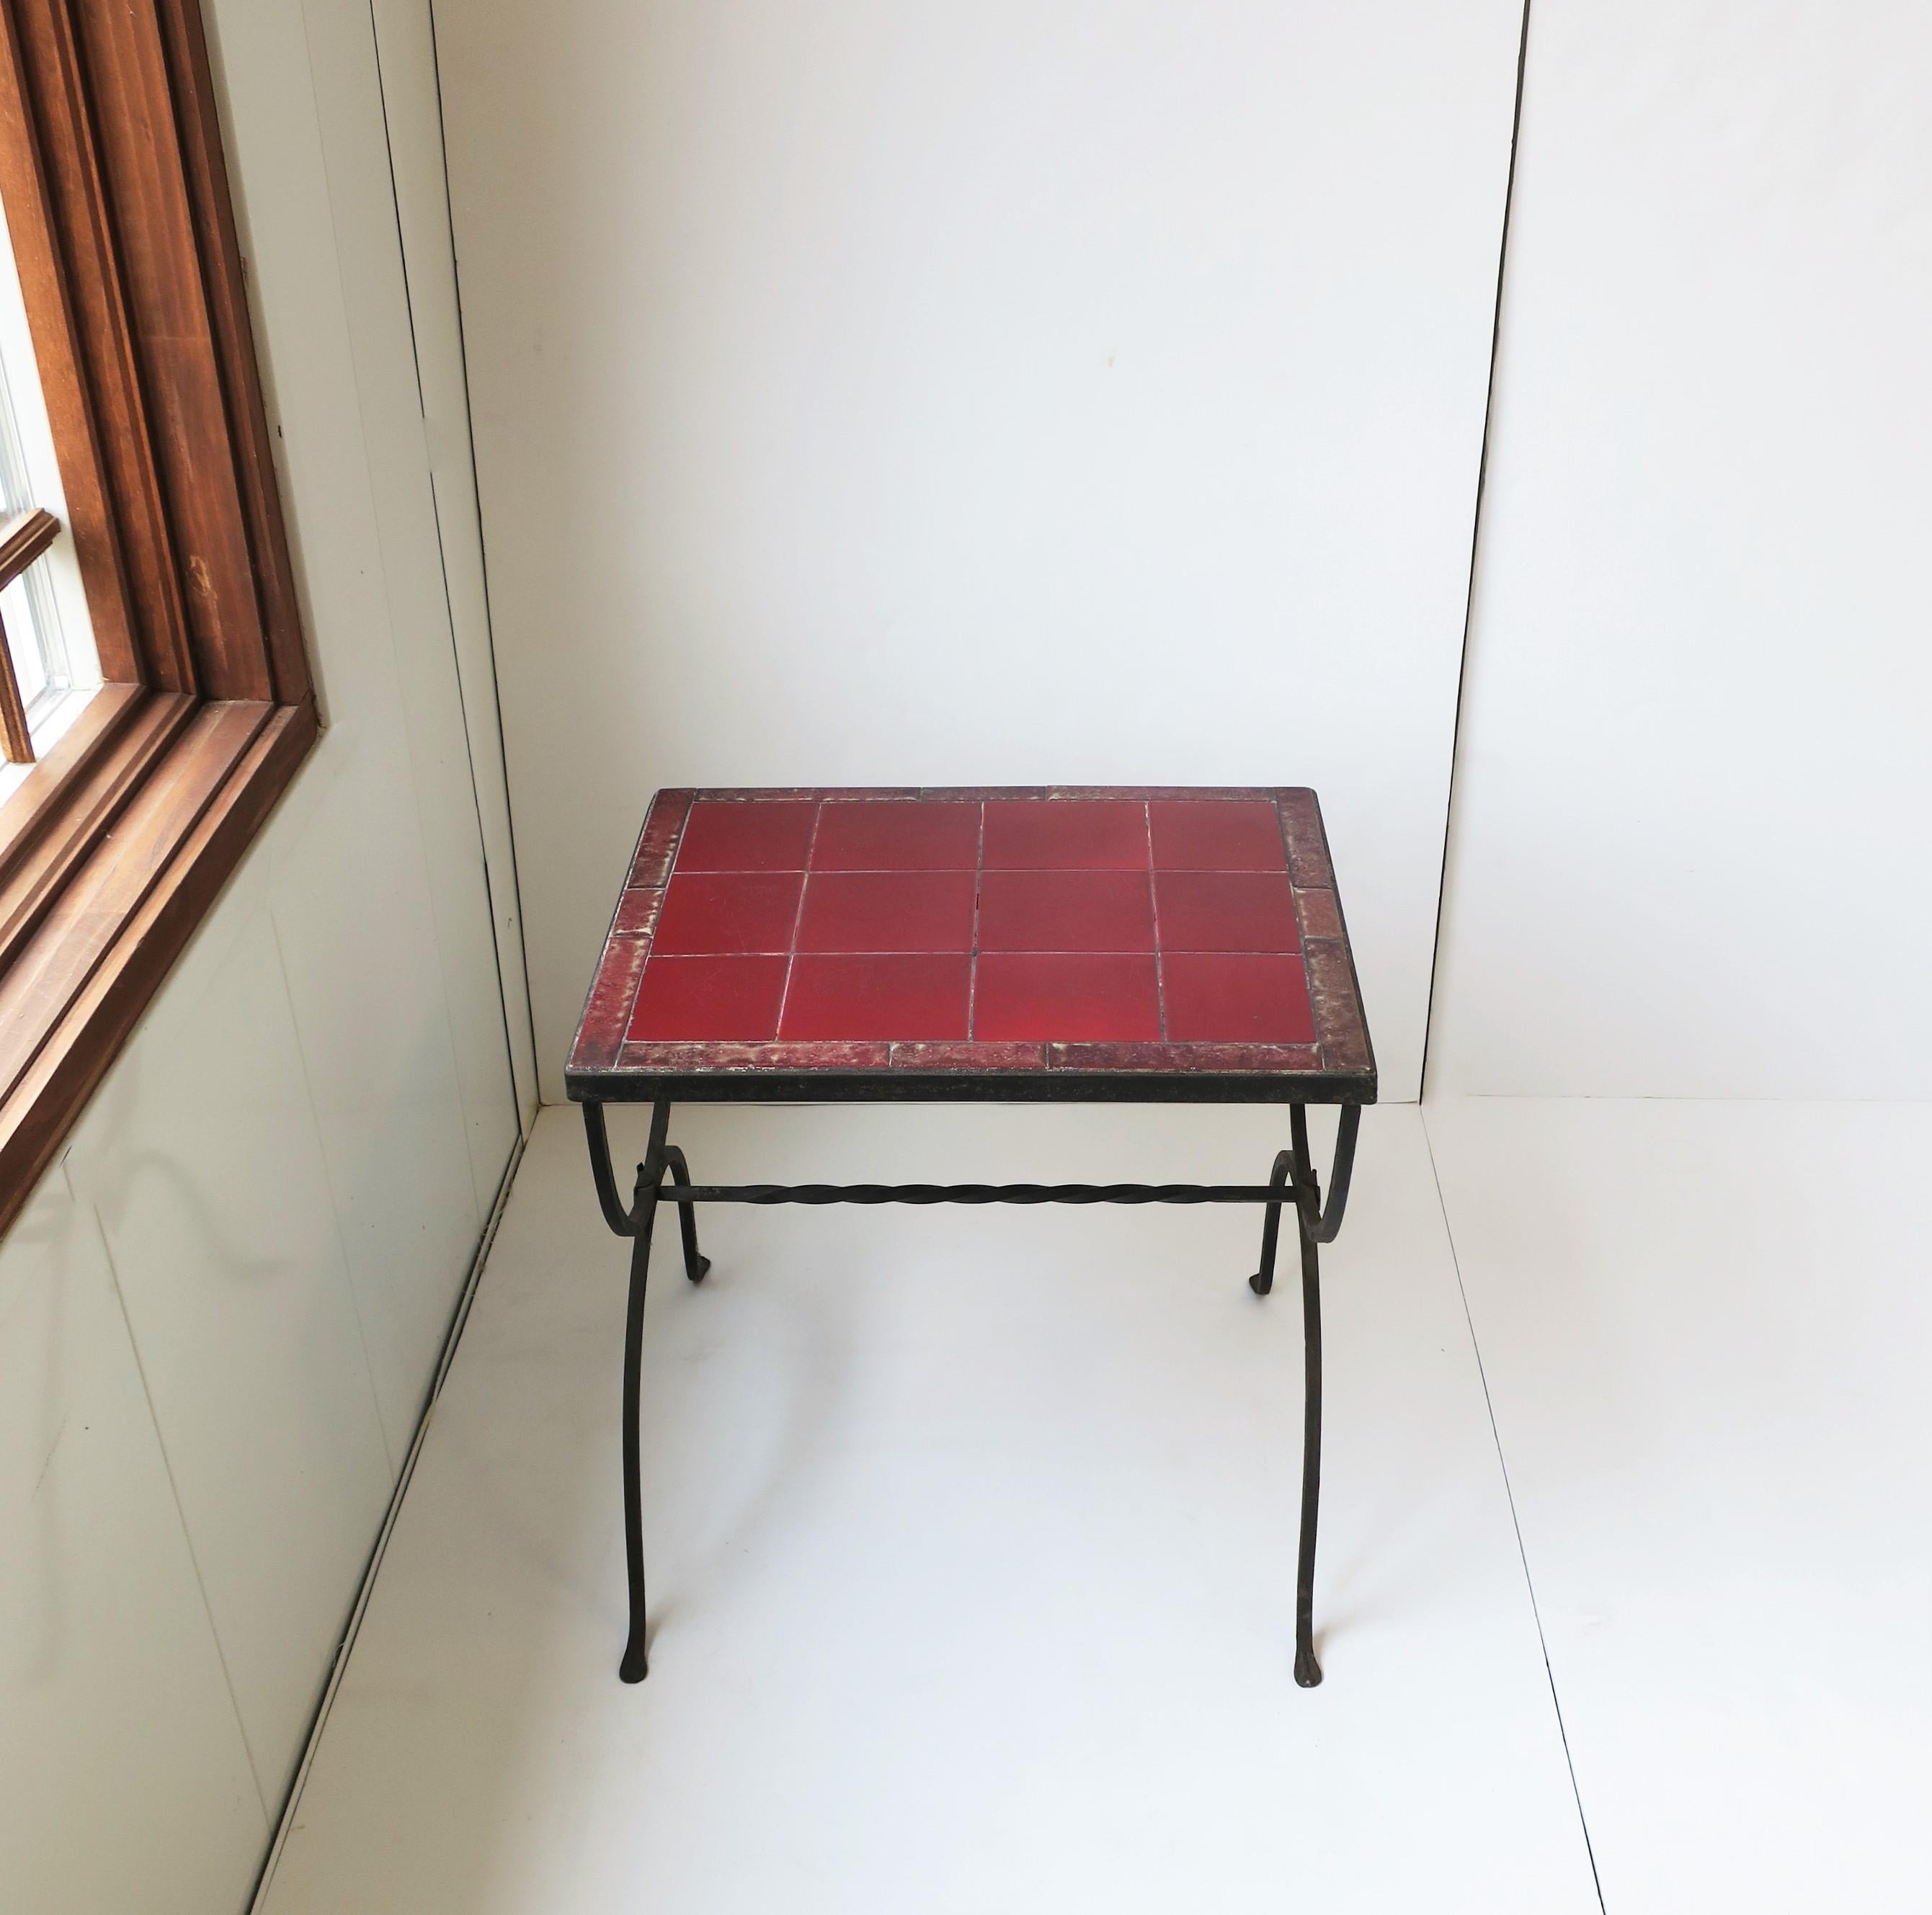 Unknown Red Burgundy Tile Top & Iron Side or End Table Patio & Outdoors Regency Revival